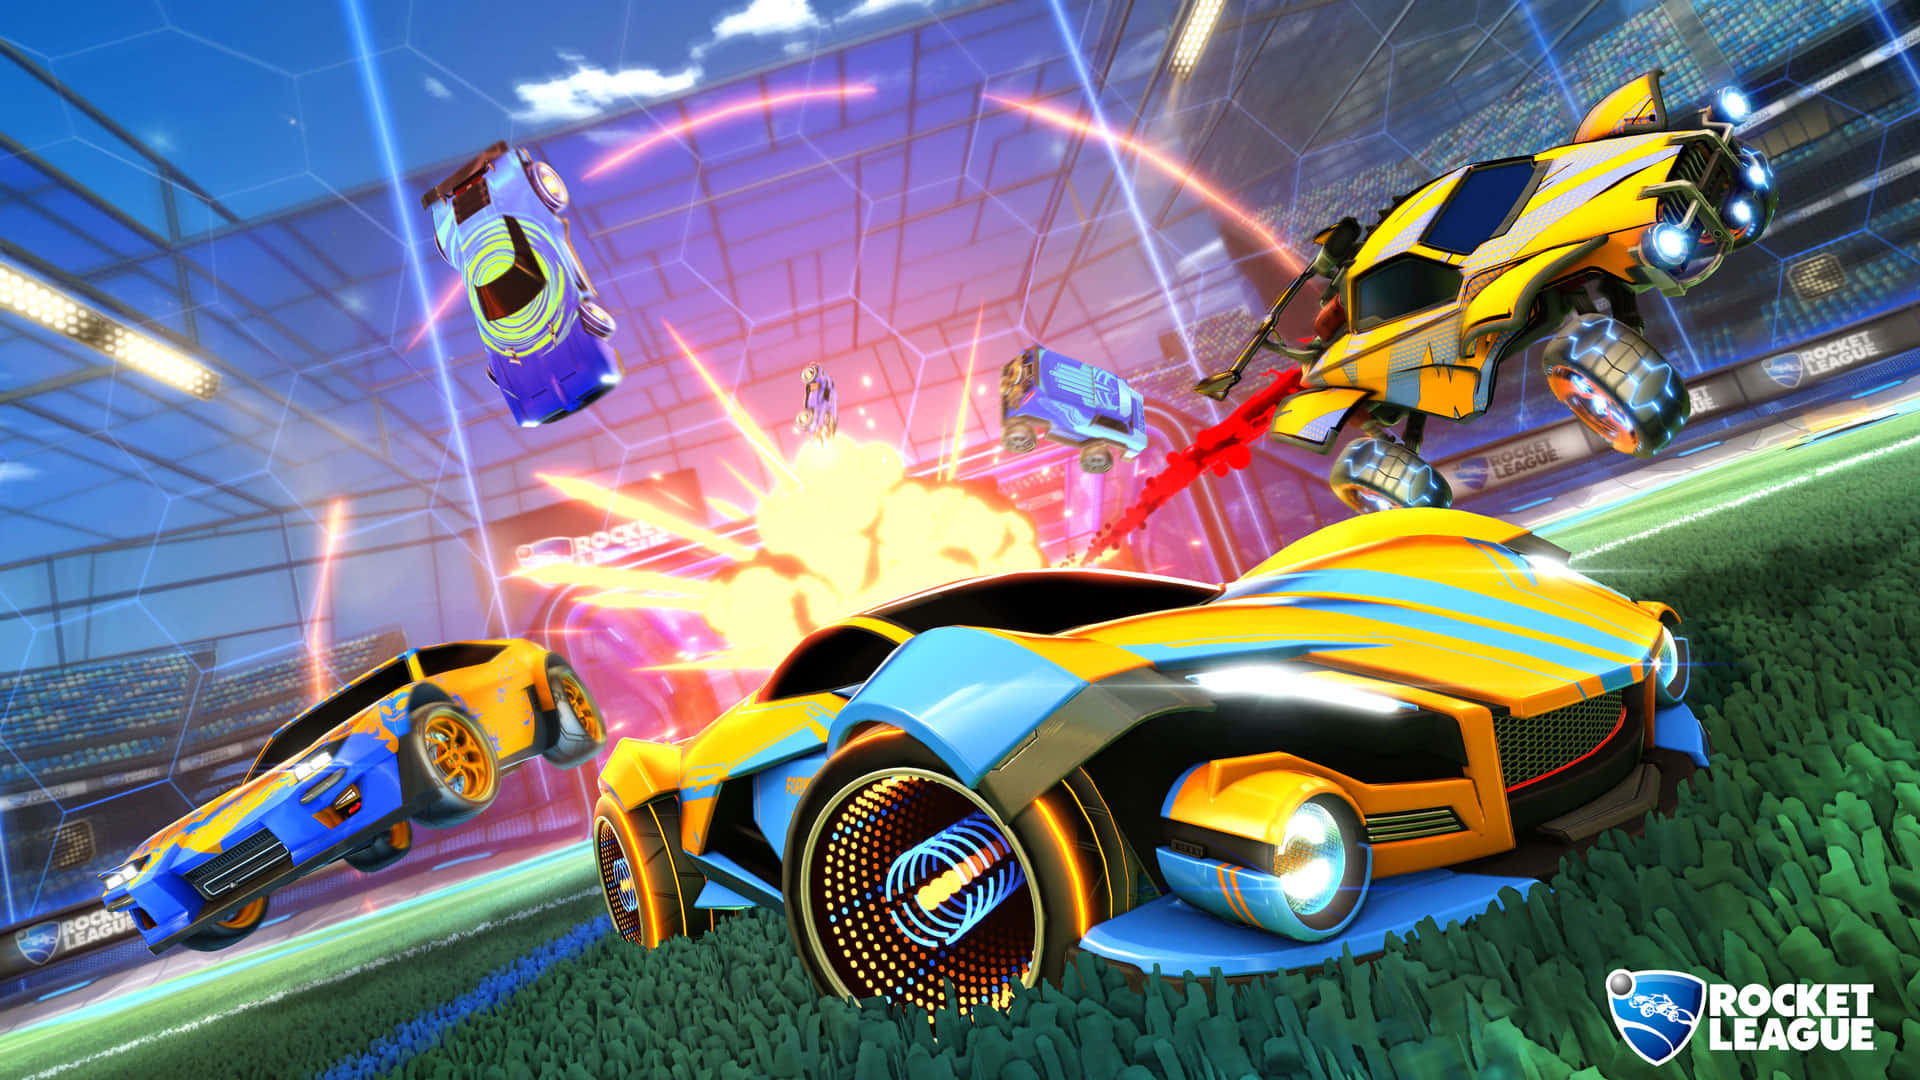 Launch into the world of Rocket League with a blazingly fast 1080p resolution.